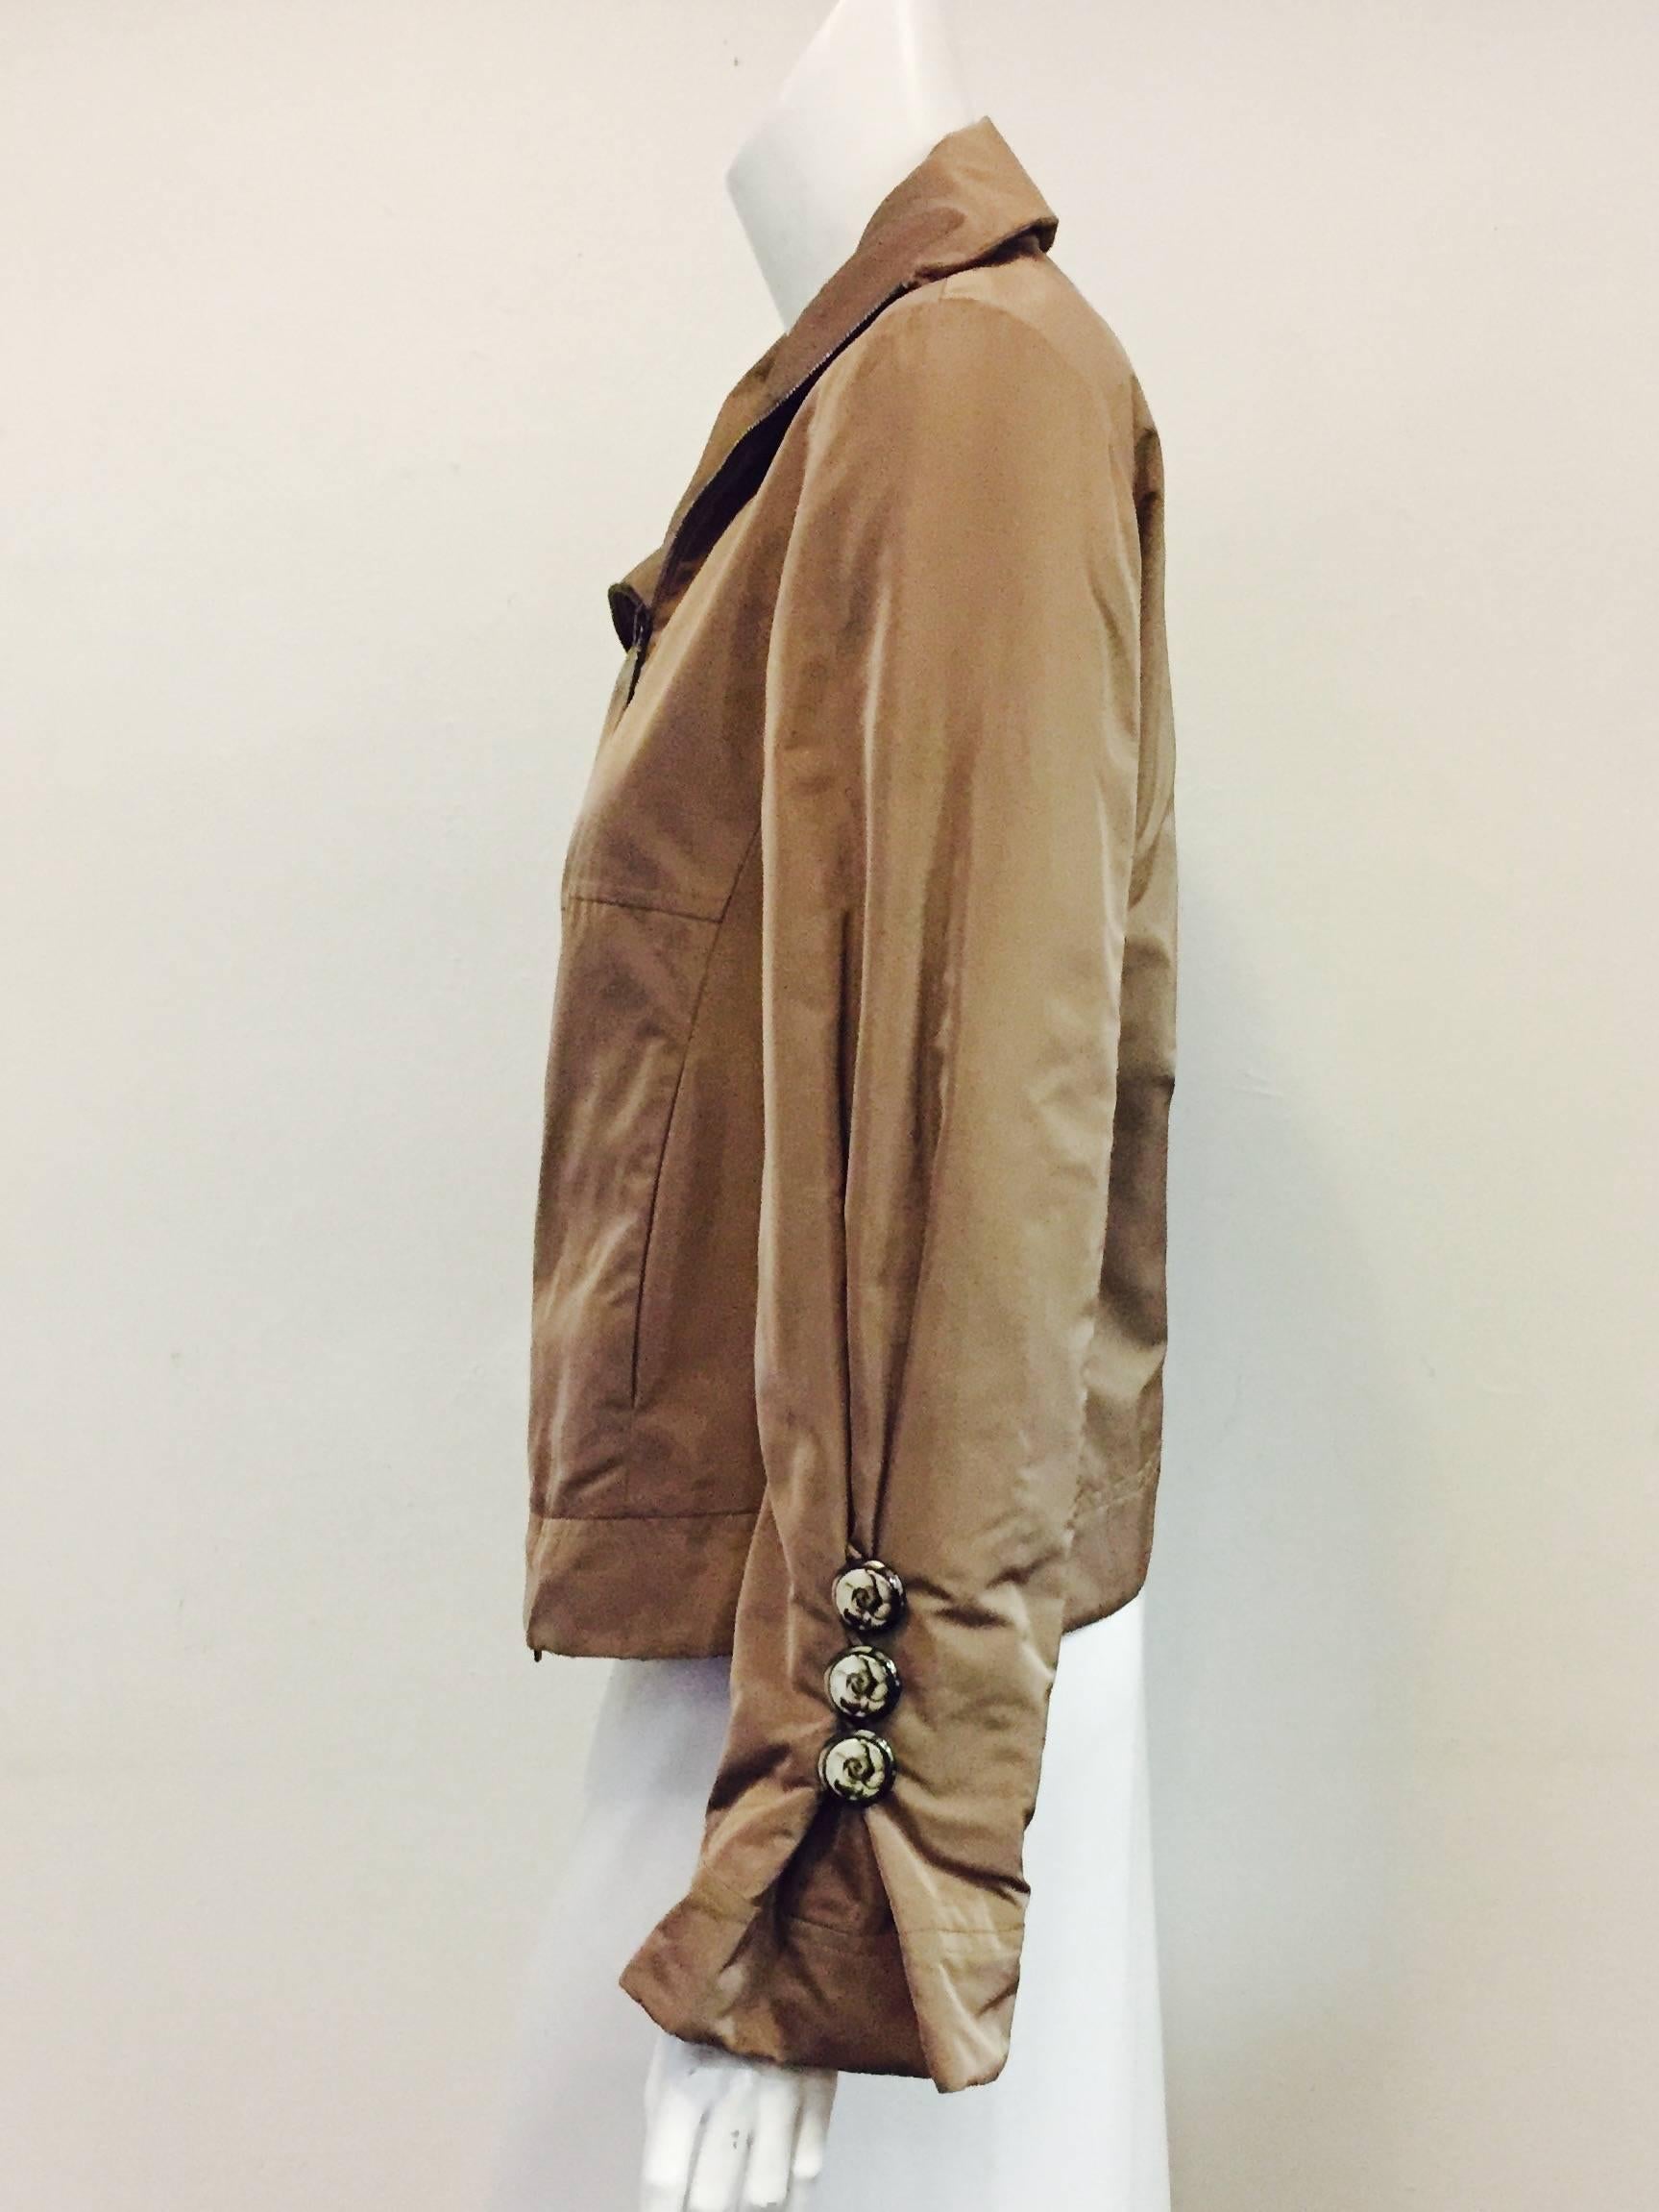 Giorgio Armani Practical Windbreaker Jacket in Taupe In Excellent Condition For Sale In Palm Beach, FL